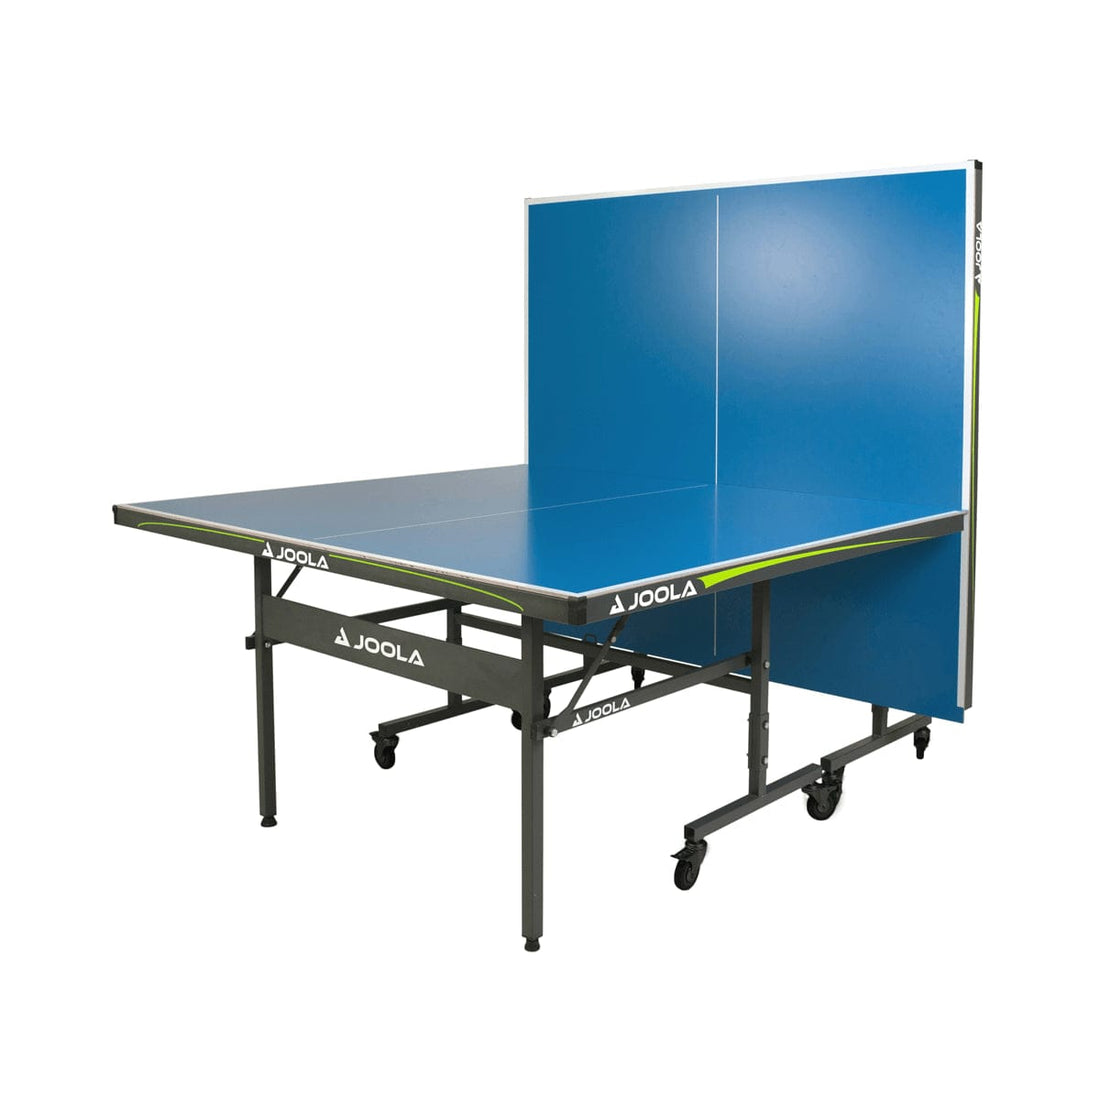 JOOLA OUTDOOR Table Tennis Table - Atomic Game Store